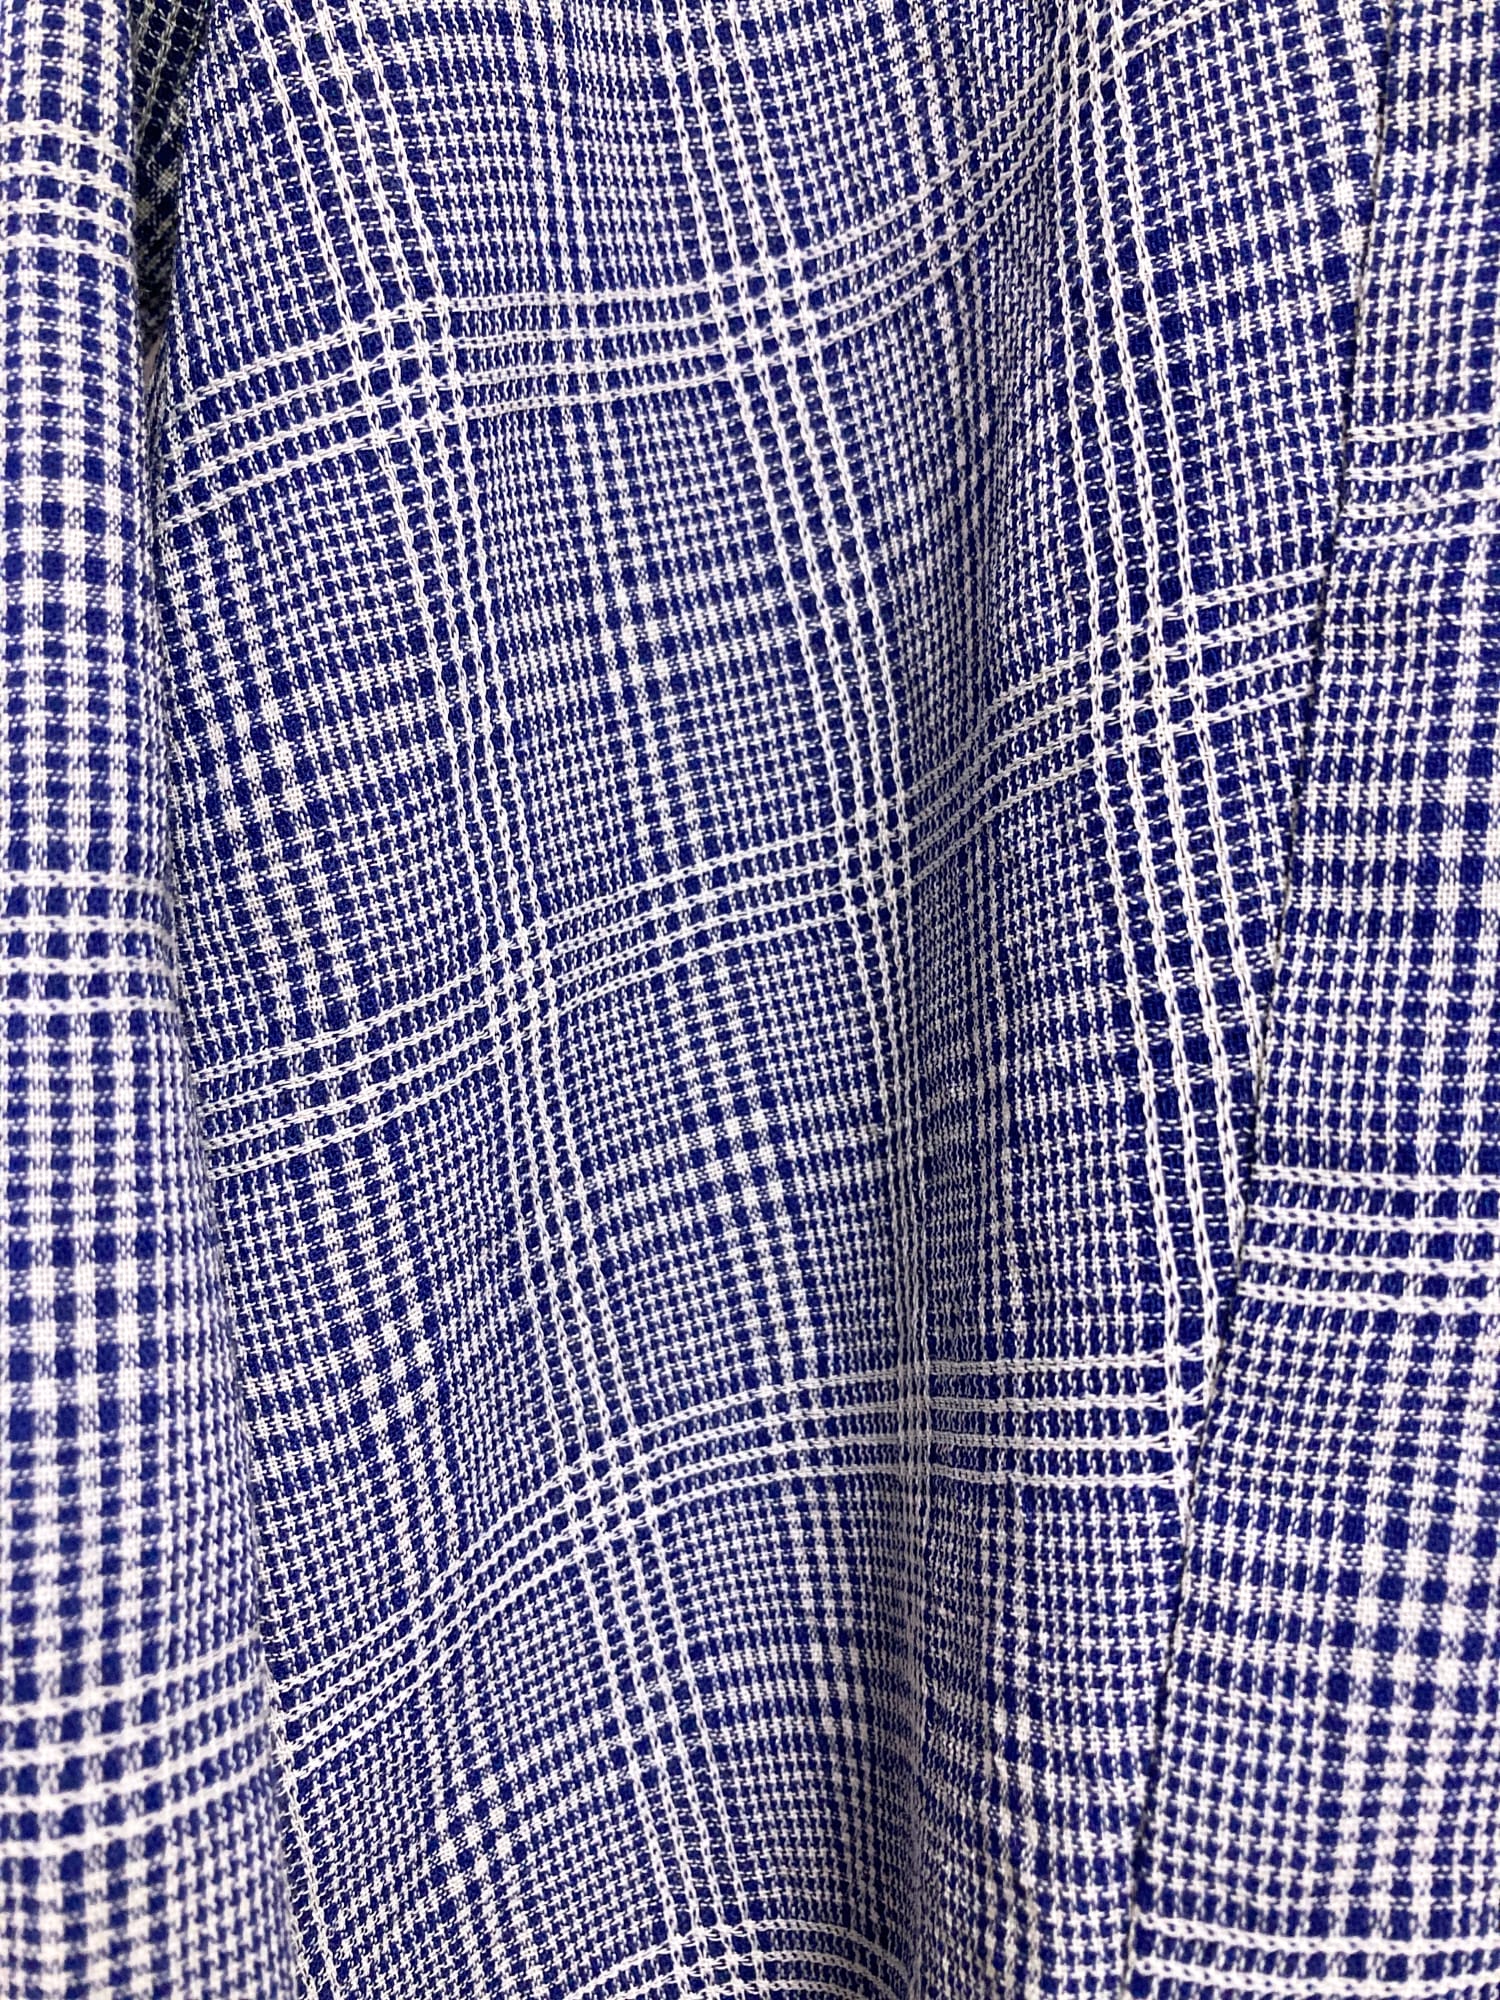 Tricot Comme des Garcons 1995 blue white check wool shirt jacket